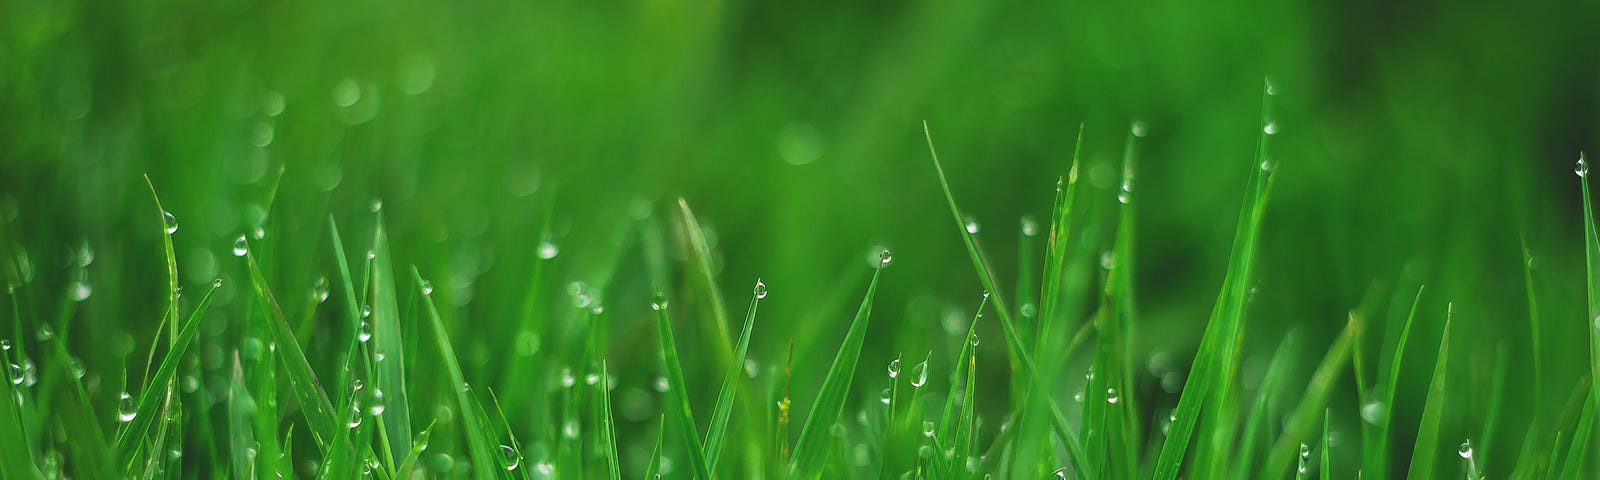 Image of green grass with glistening rain drops.